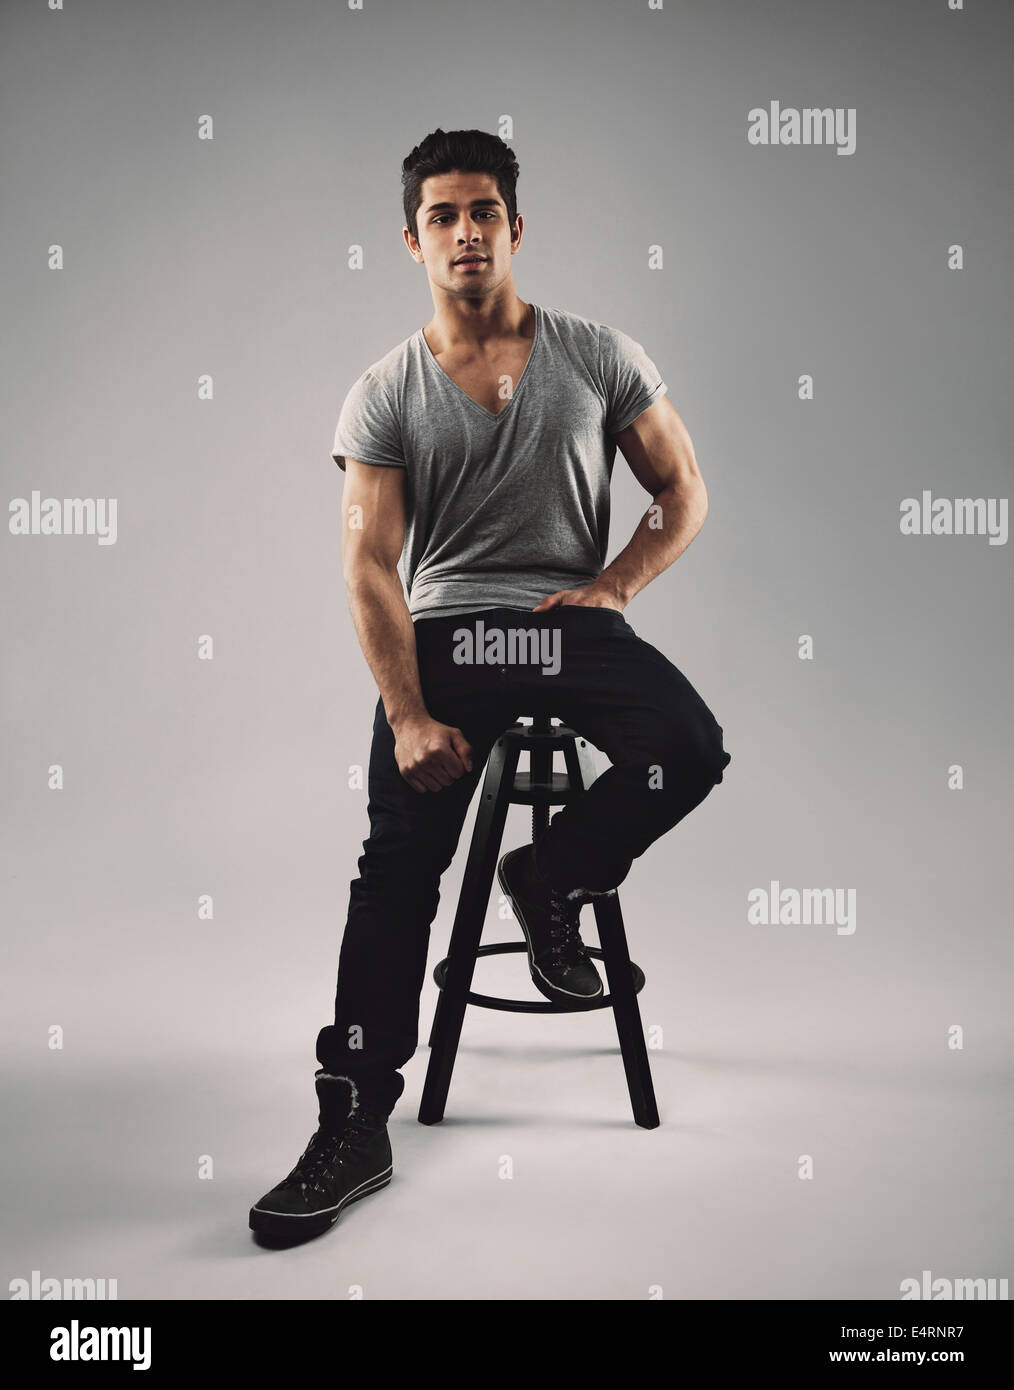 Full length portrait of handsome young man sitting on bar stool. Young hispanic male model over grey background. Stock Photo